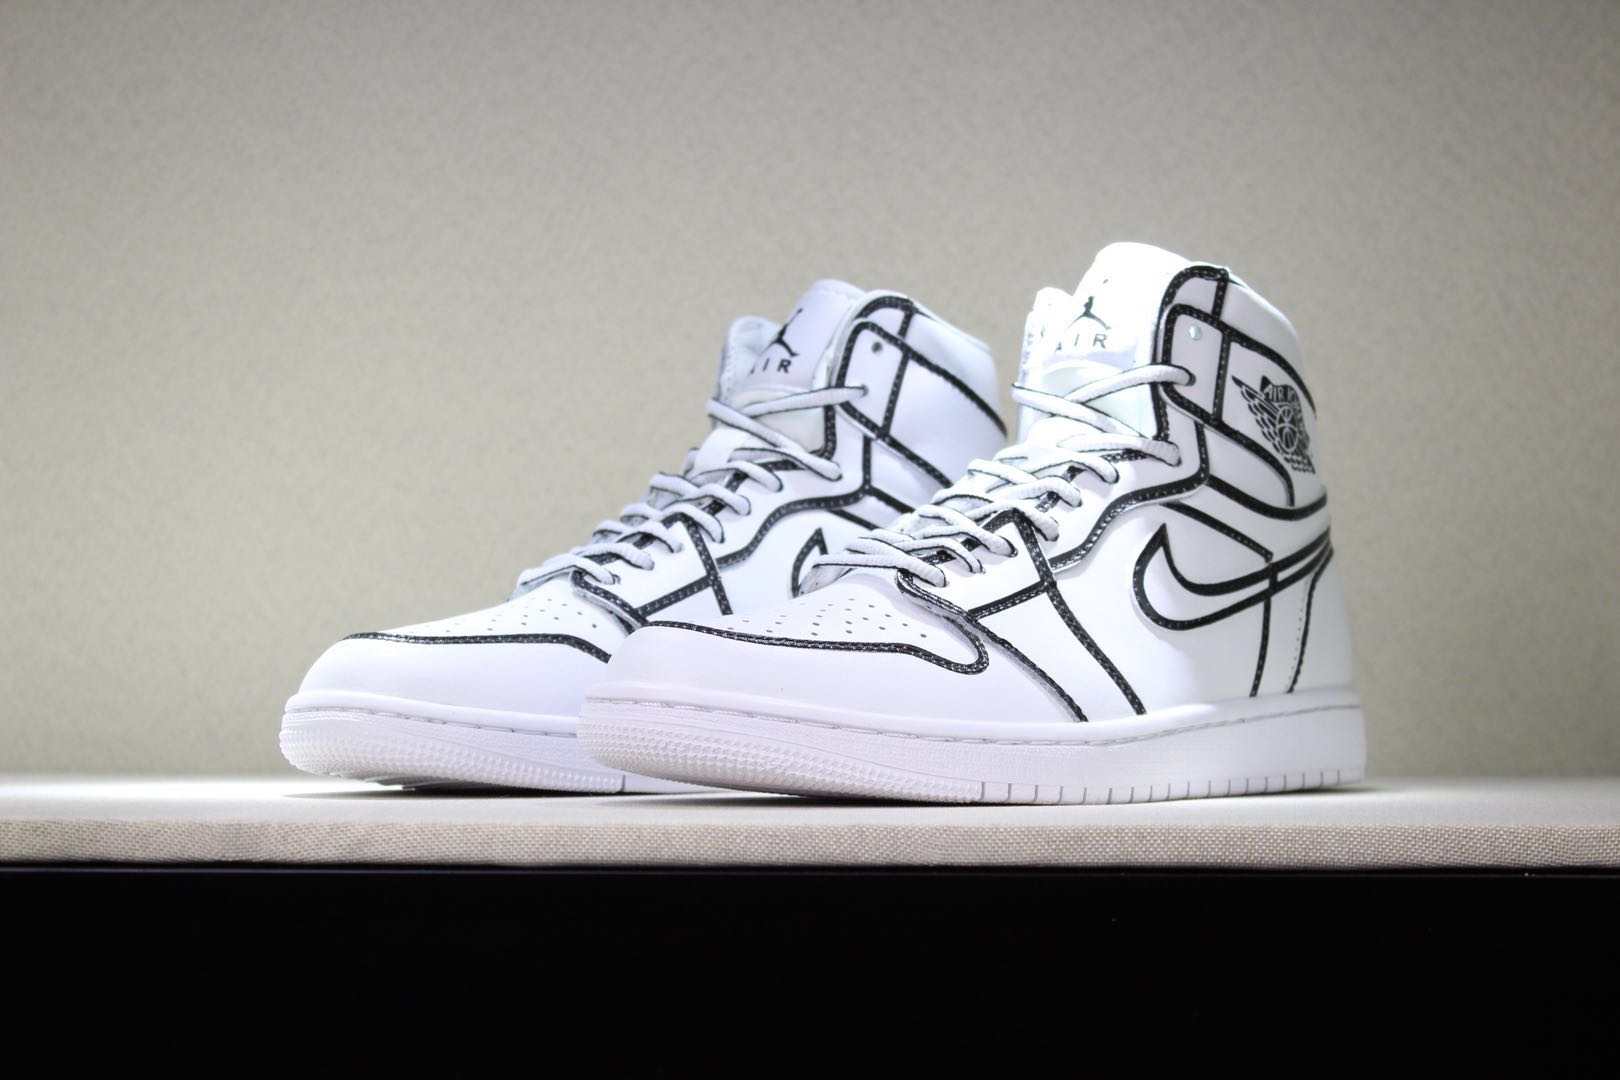 New Air Jordan 1 Painting White Black Lover Shoes - Click Image to Close